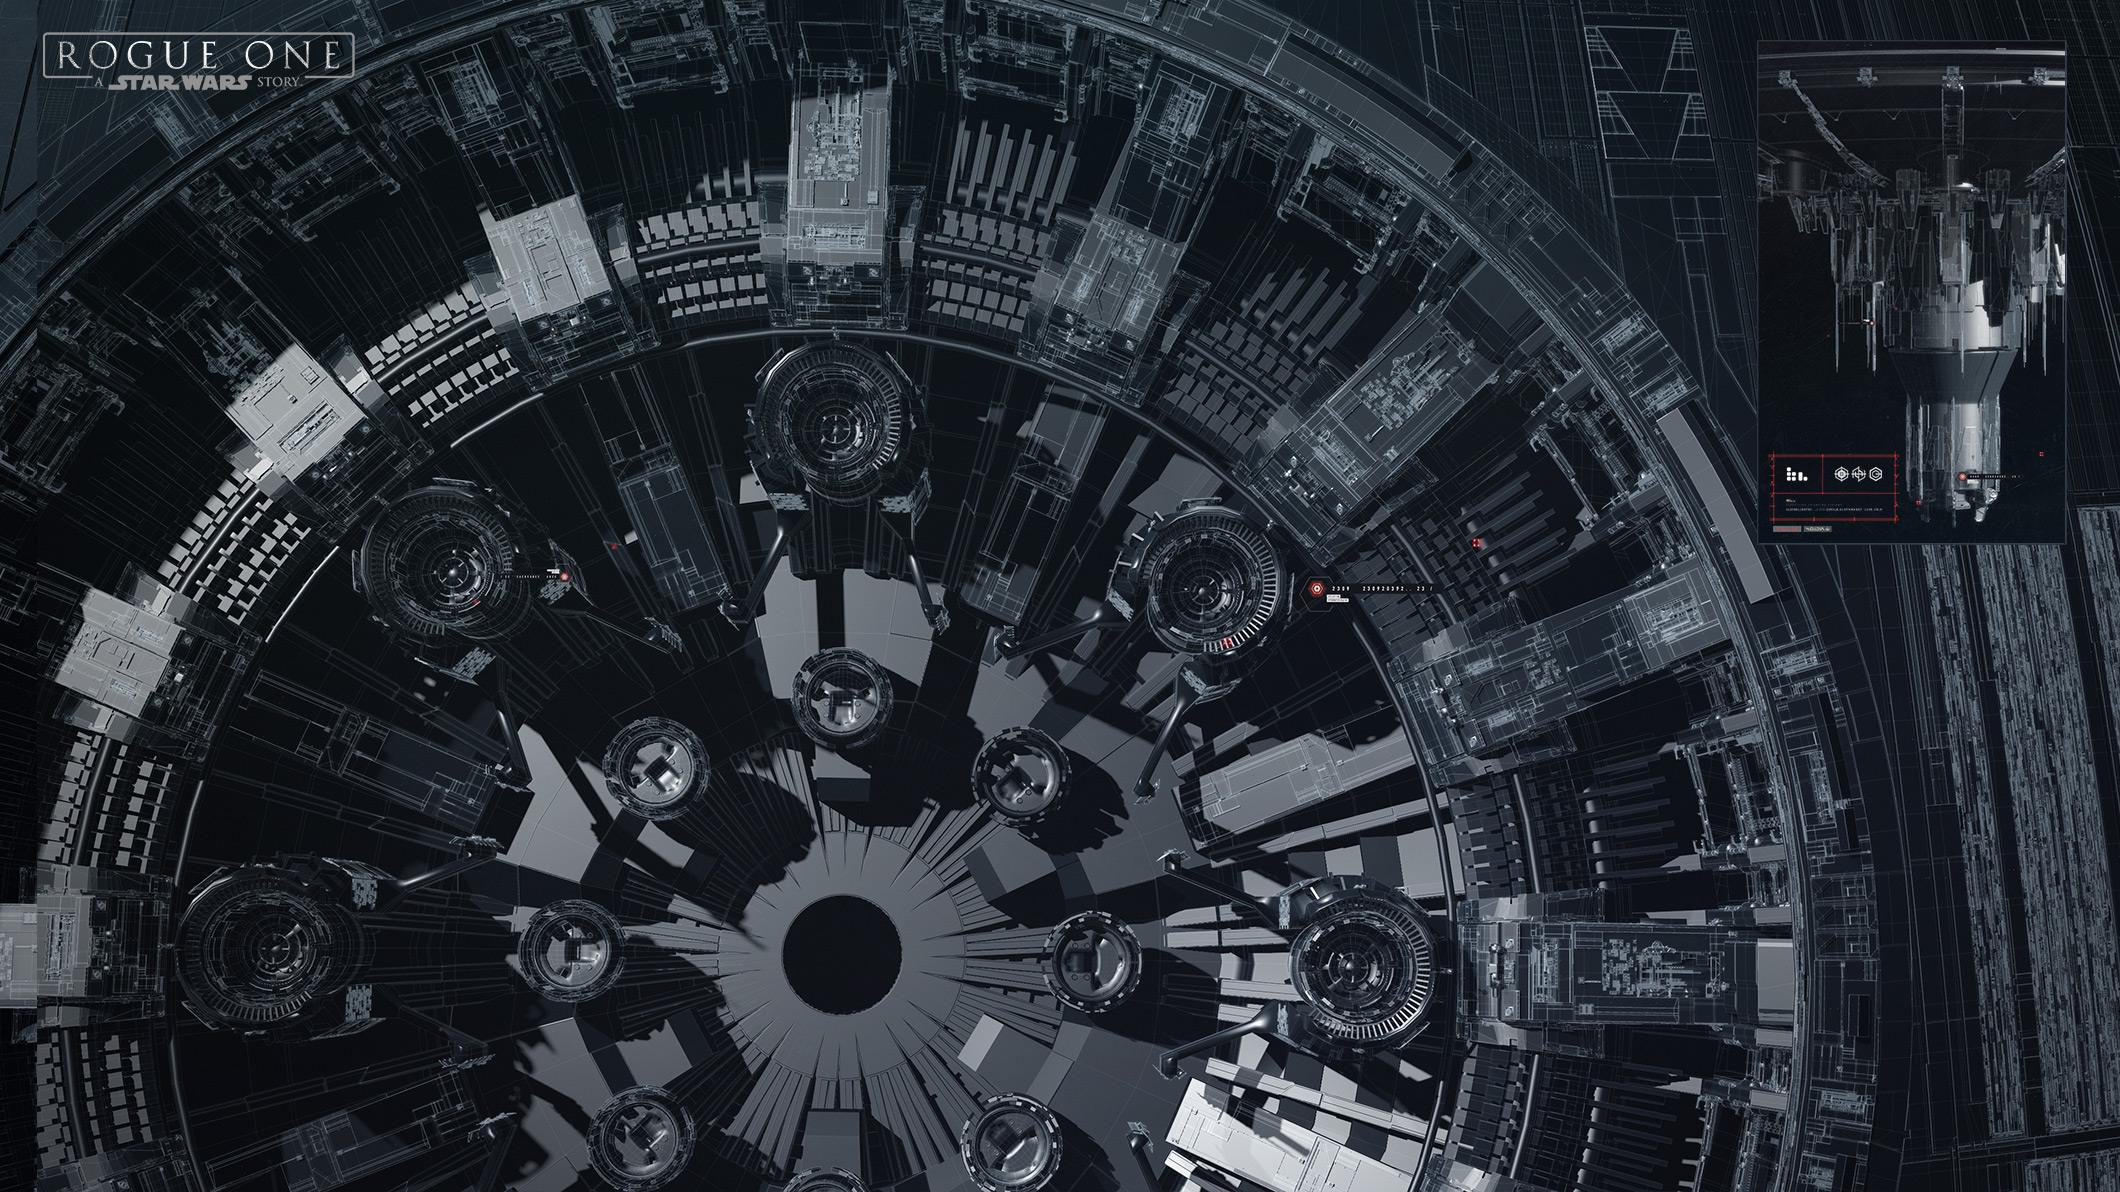 The Rogue One Death Star Plans Hd Wallpaper - Rogue One Death Star Wallpaper Hd - HD Wallpaper 